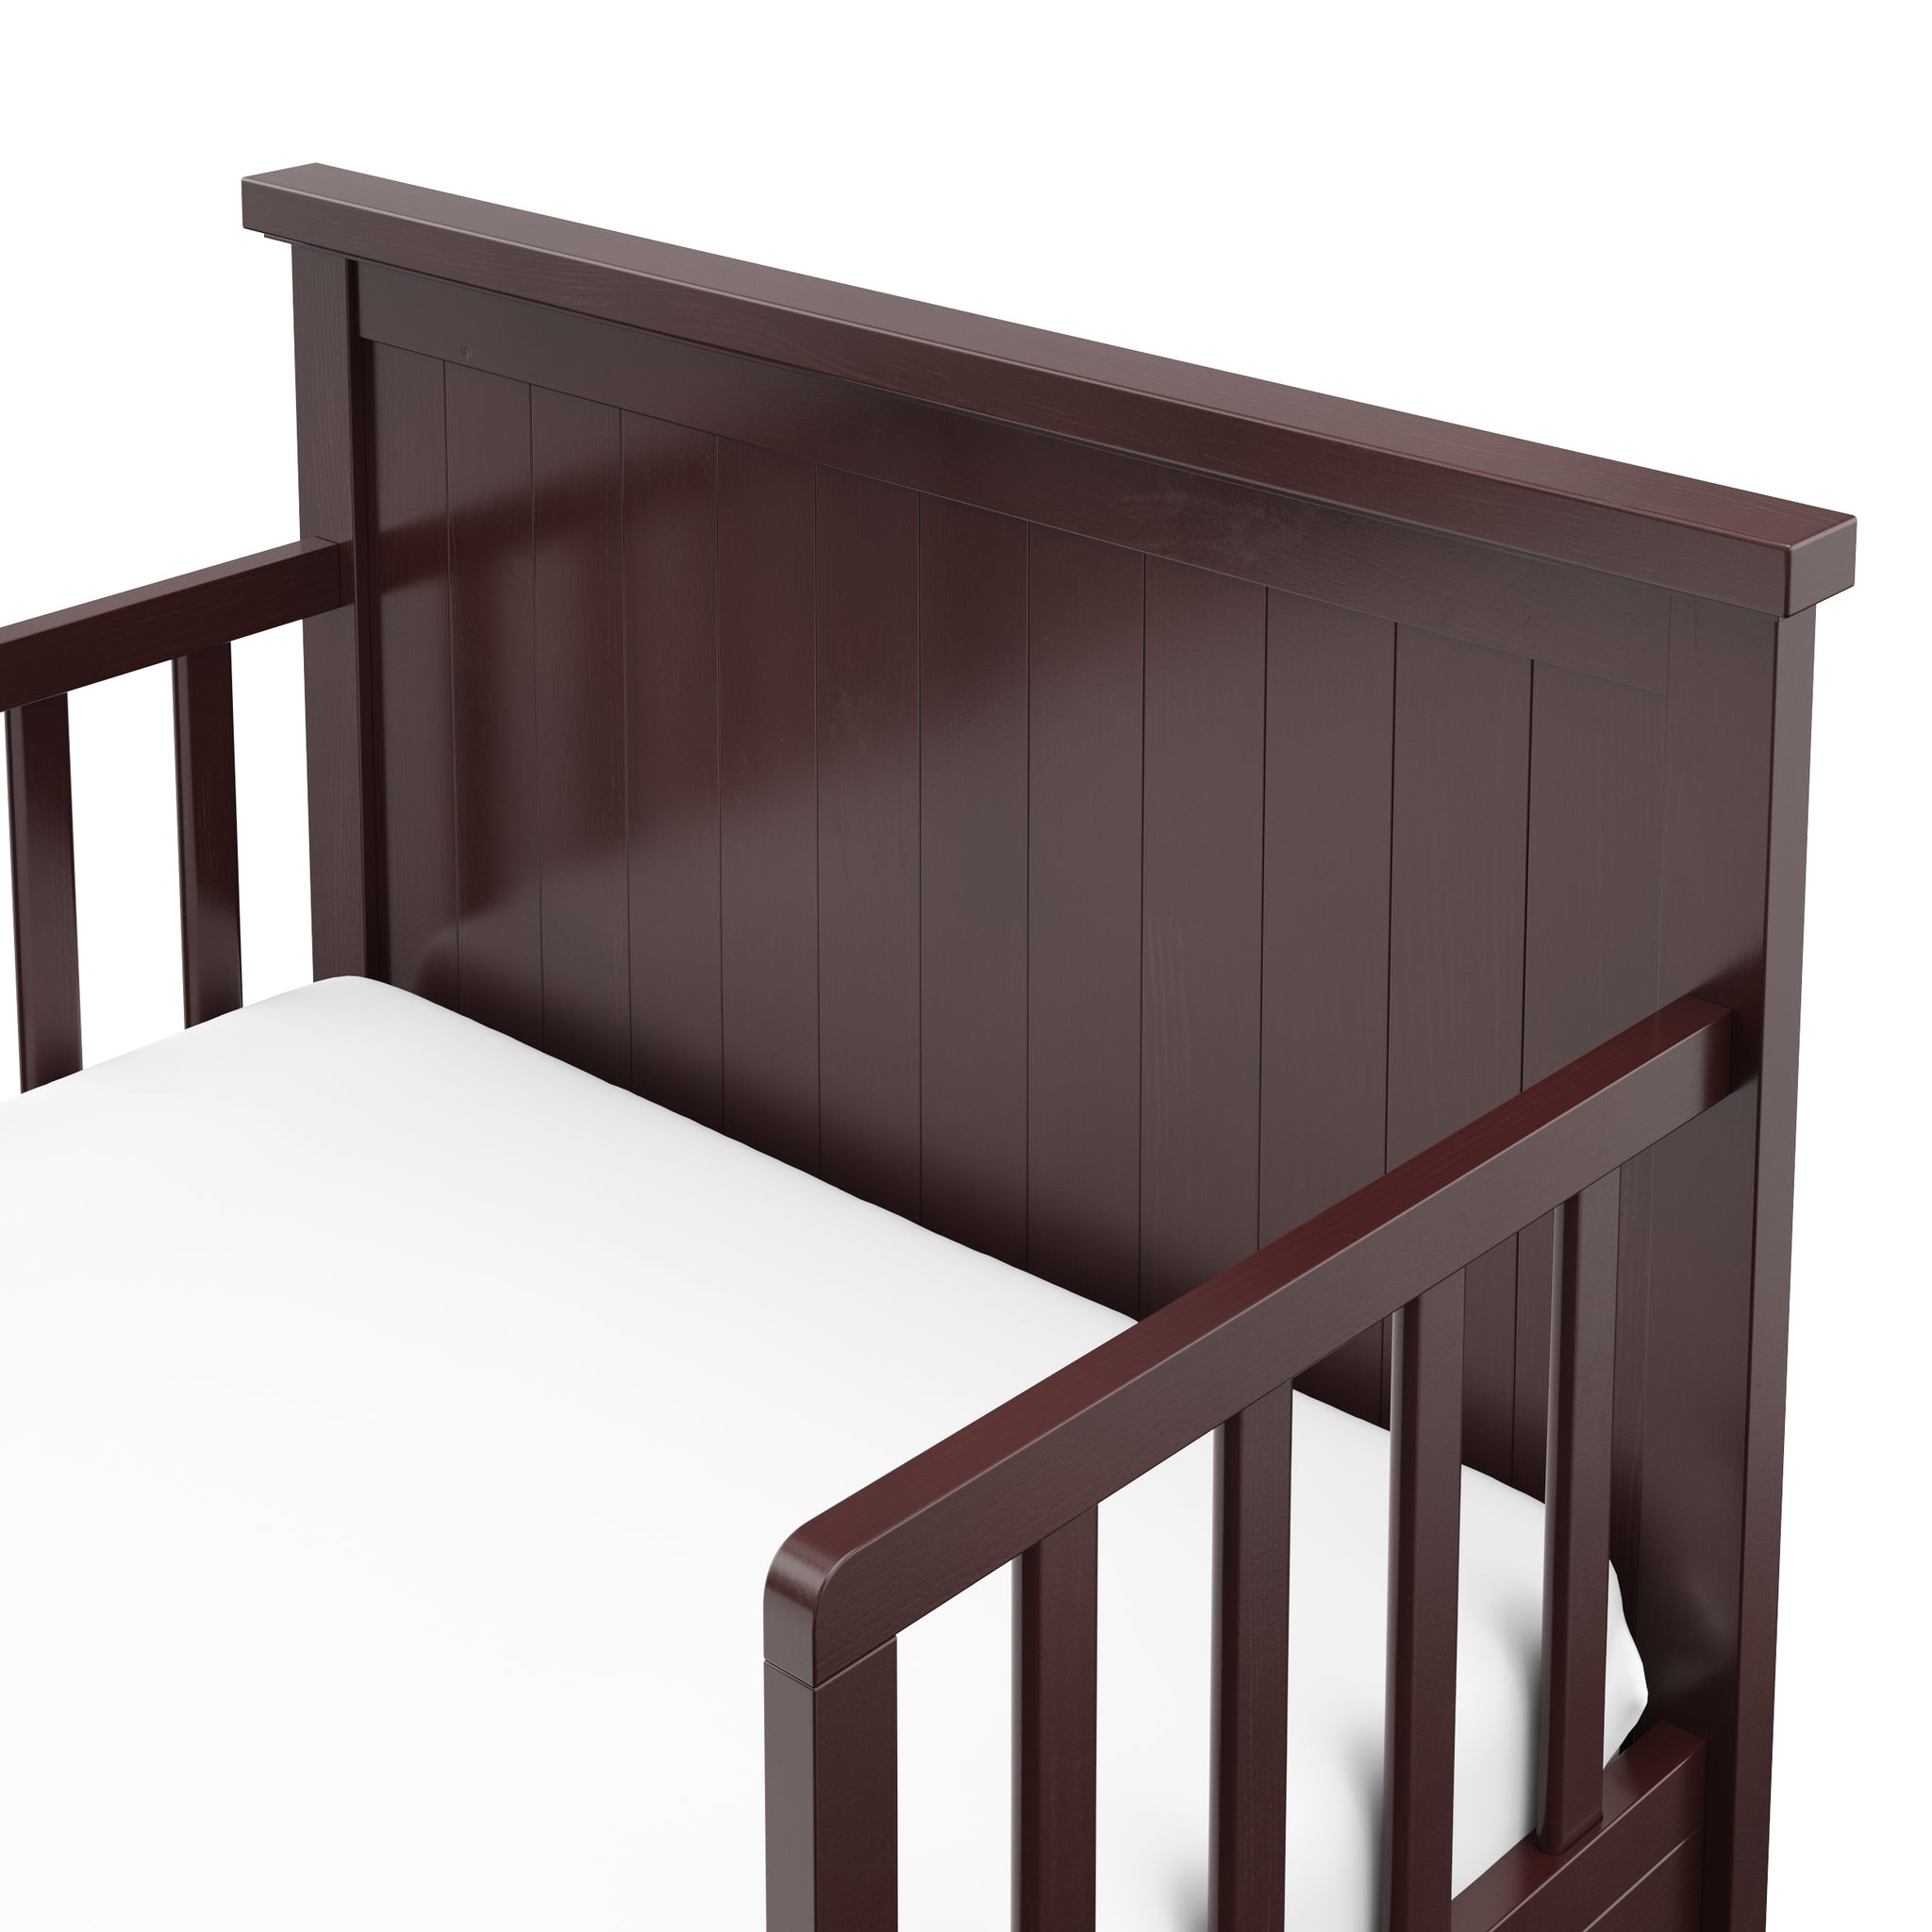 Close-up view of espresso toddler bed’s headboard